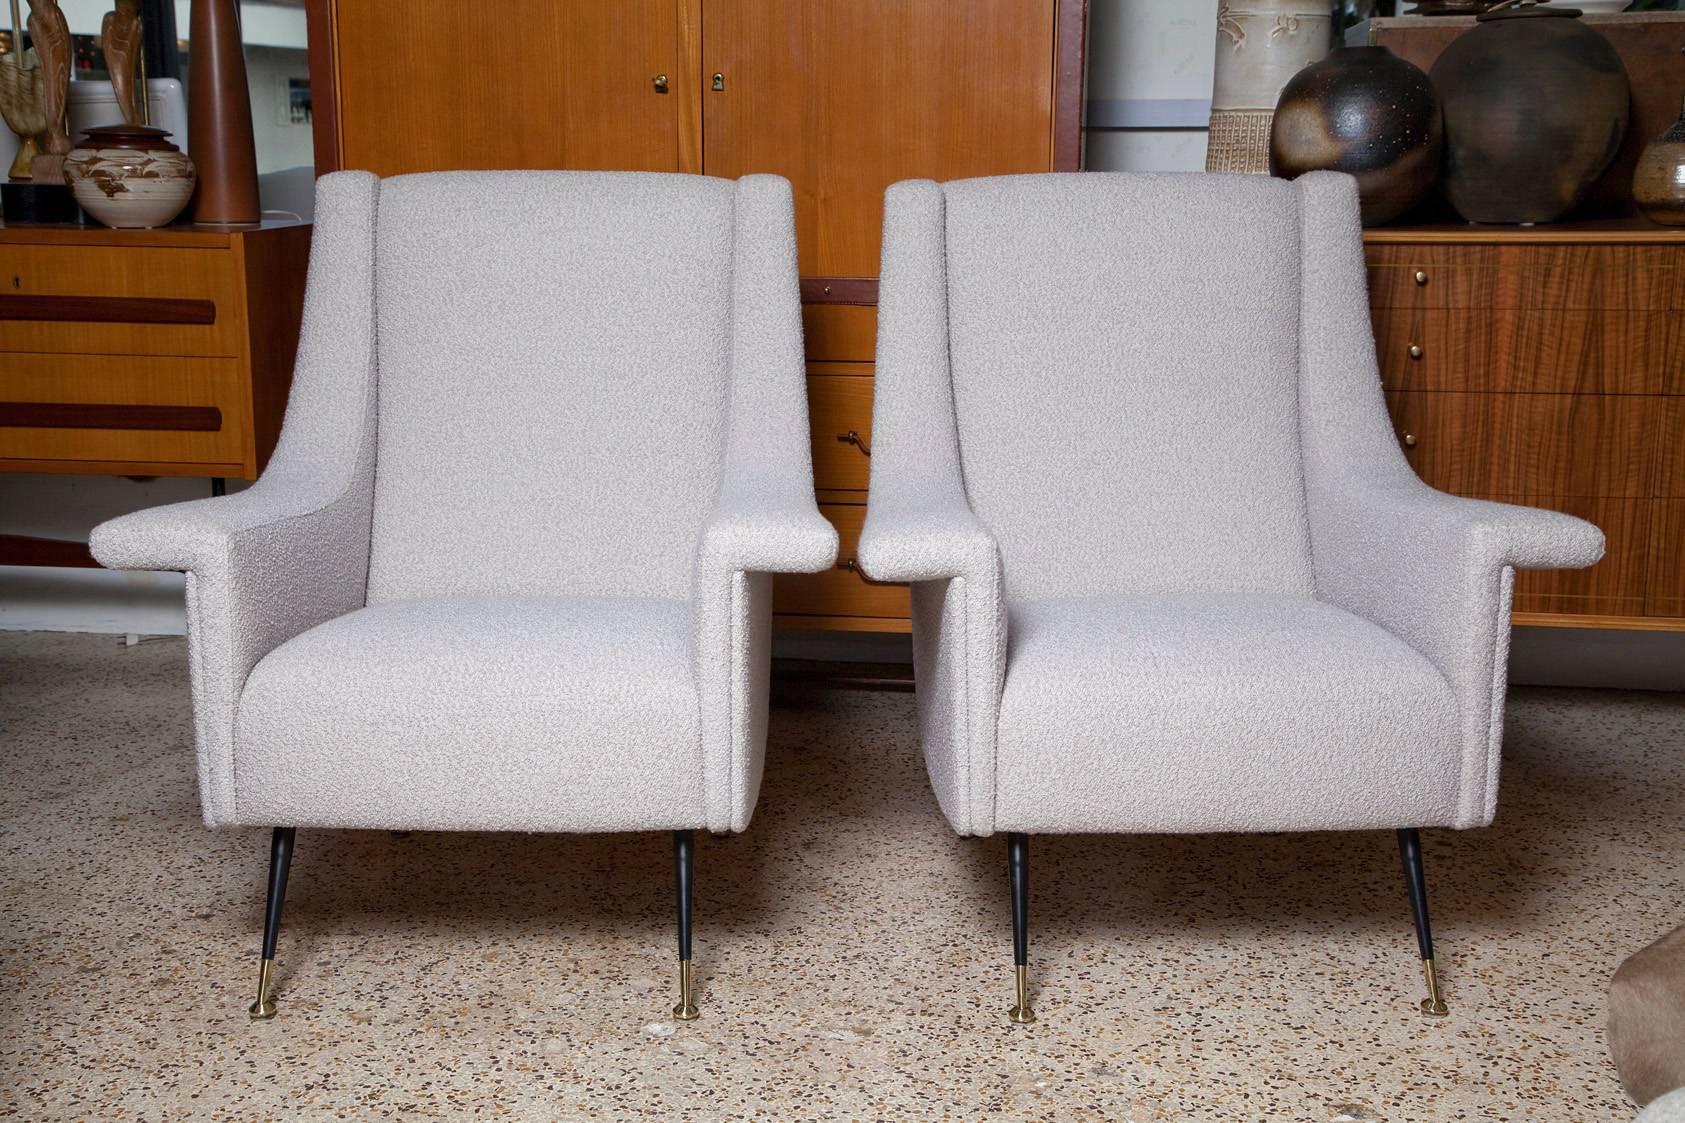 Large and comfy 1950s Italian lounge chairs, fully restored and upholstered in a soft, thick alpaca, wool, and silk blend in pale, pearly, greige. Black enameled legs with polished brass sabots.